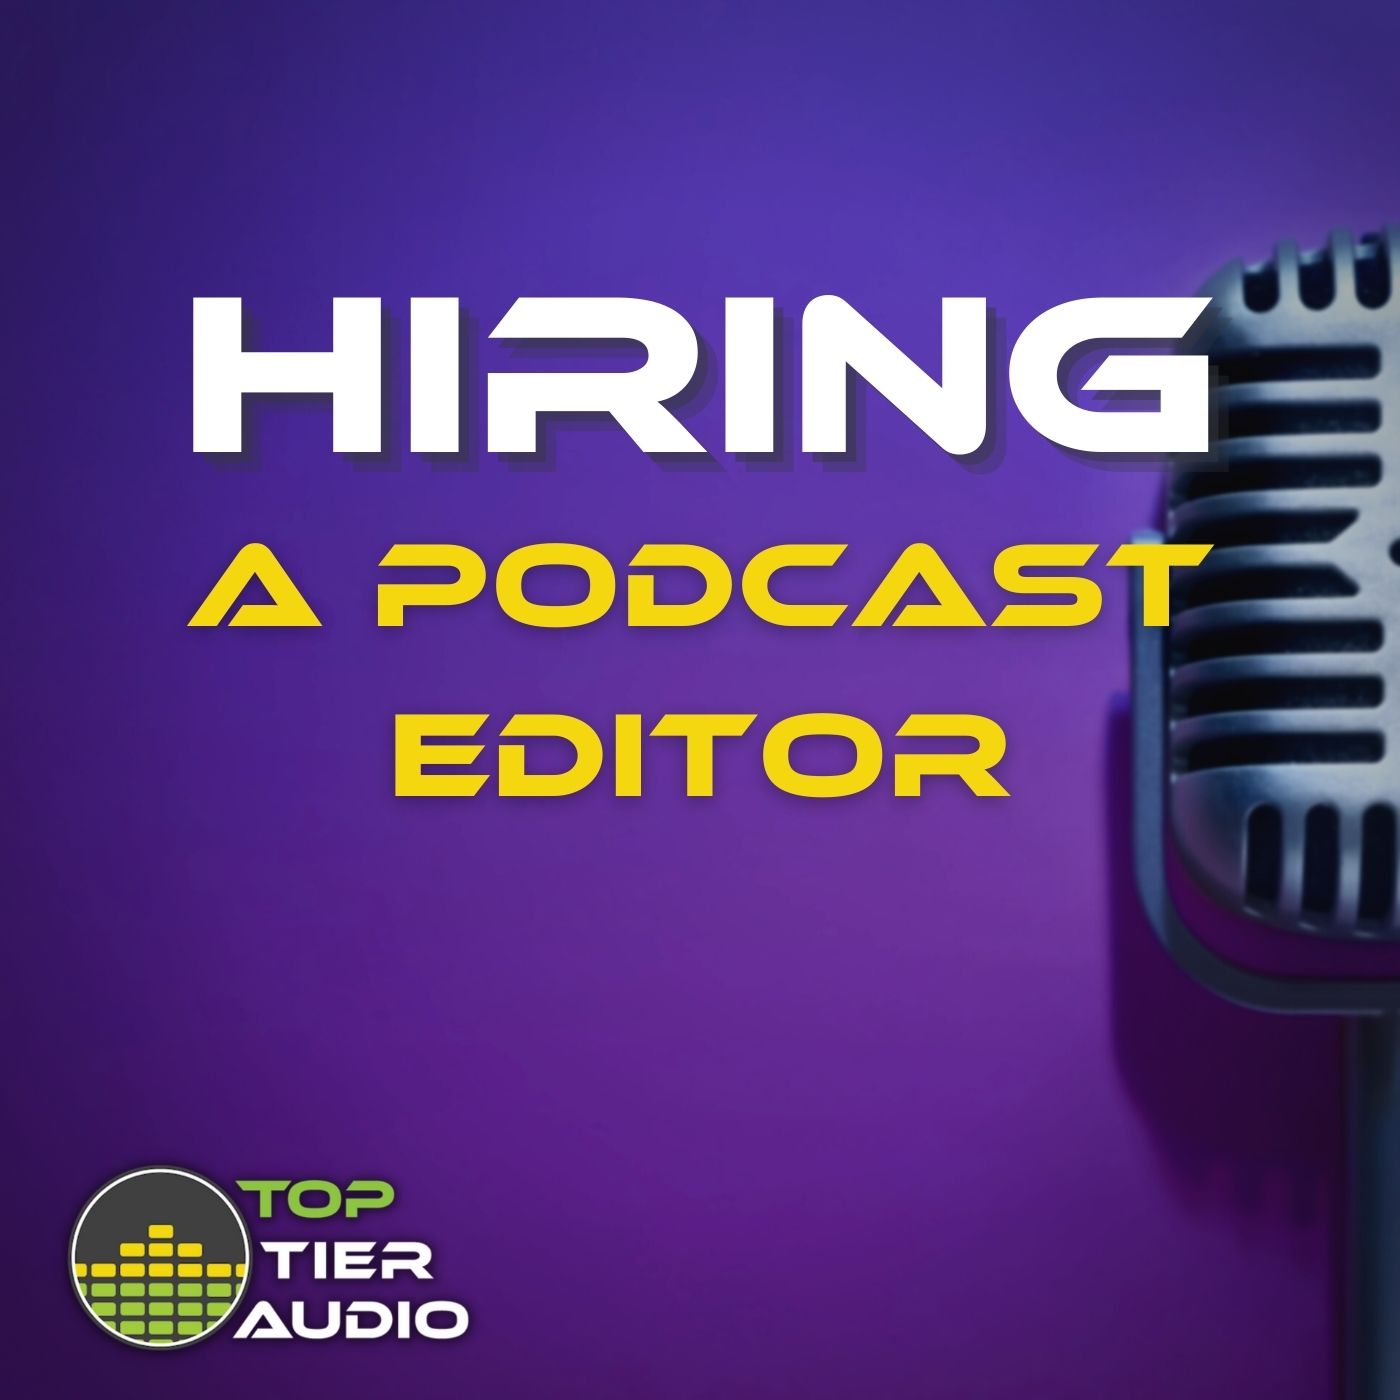 Artwork for podcast Hiring a Podcast Editor